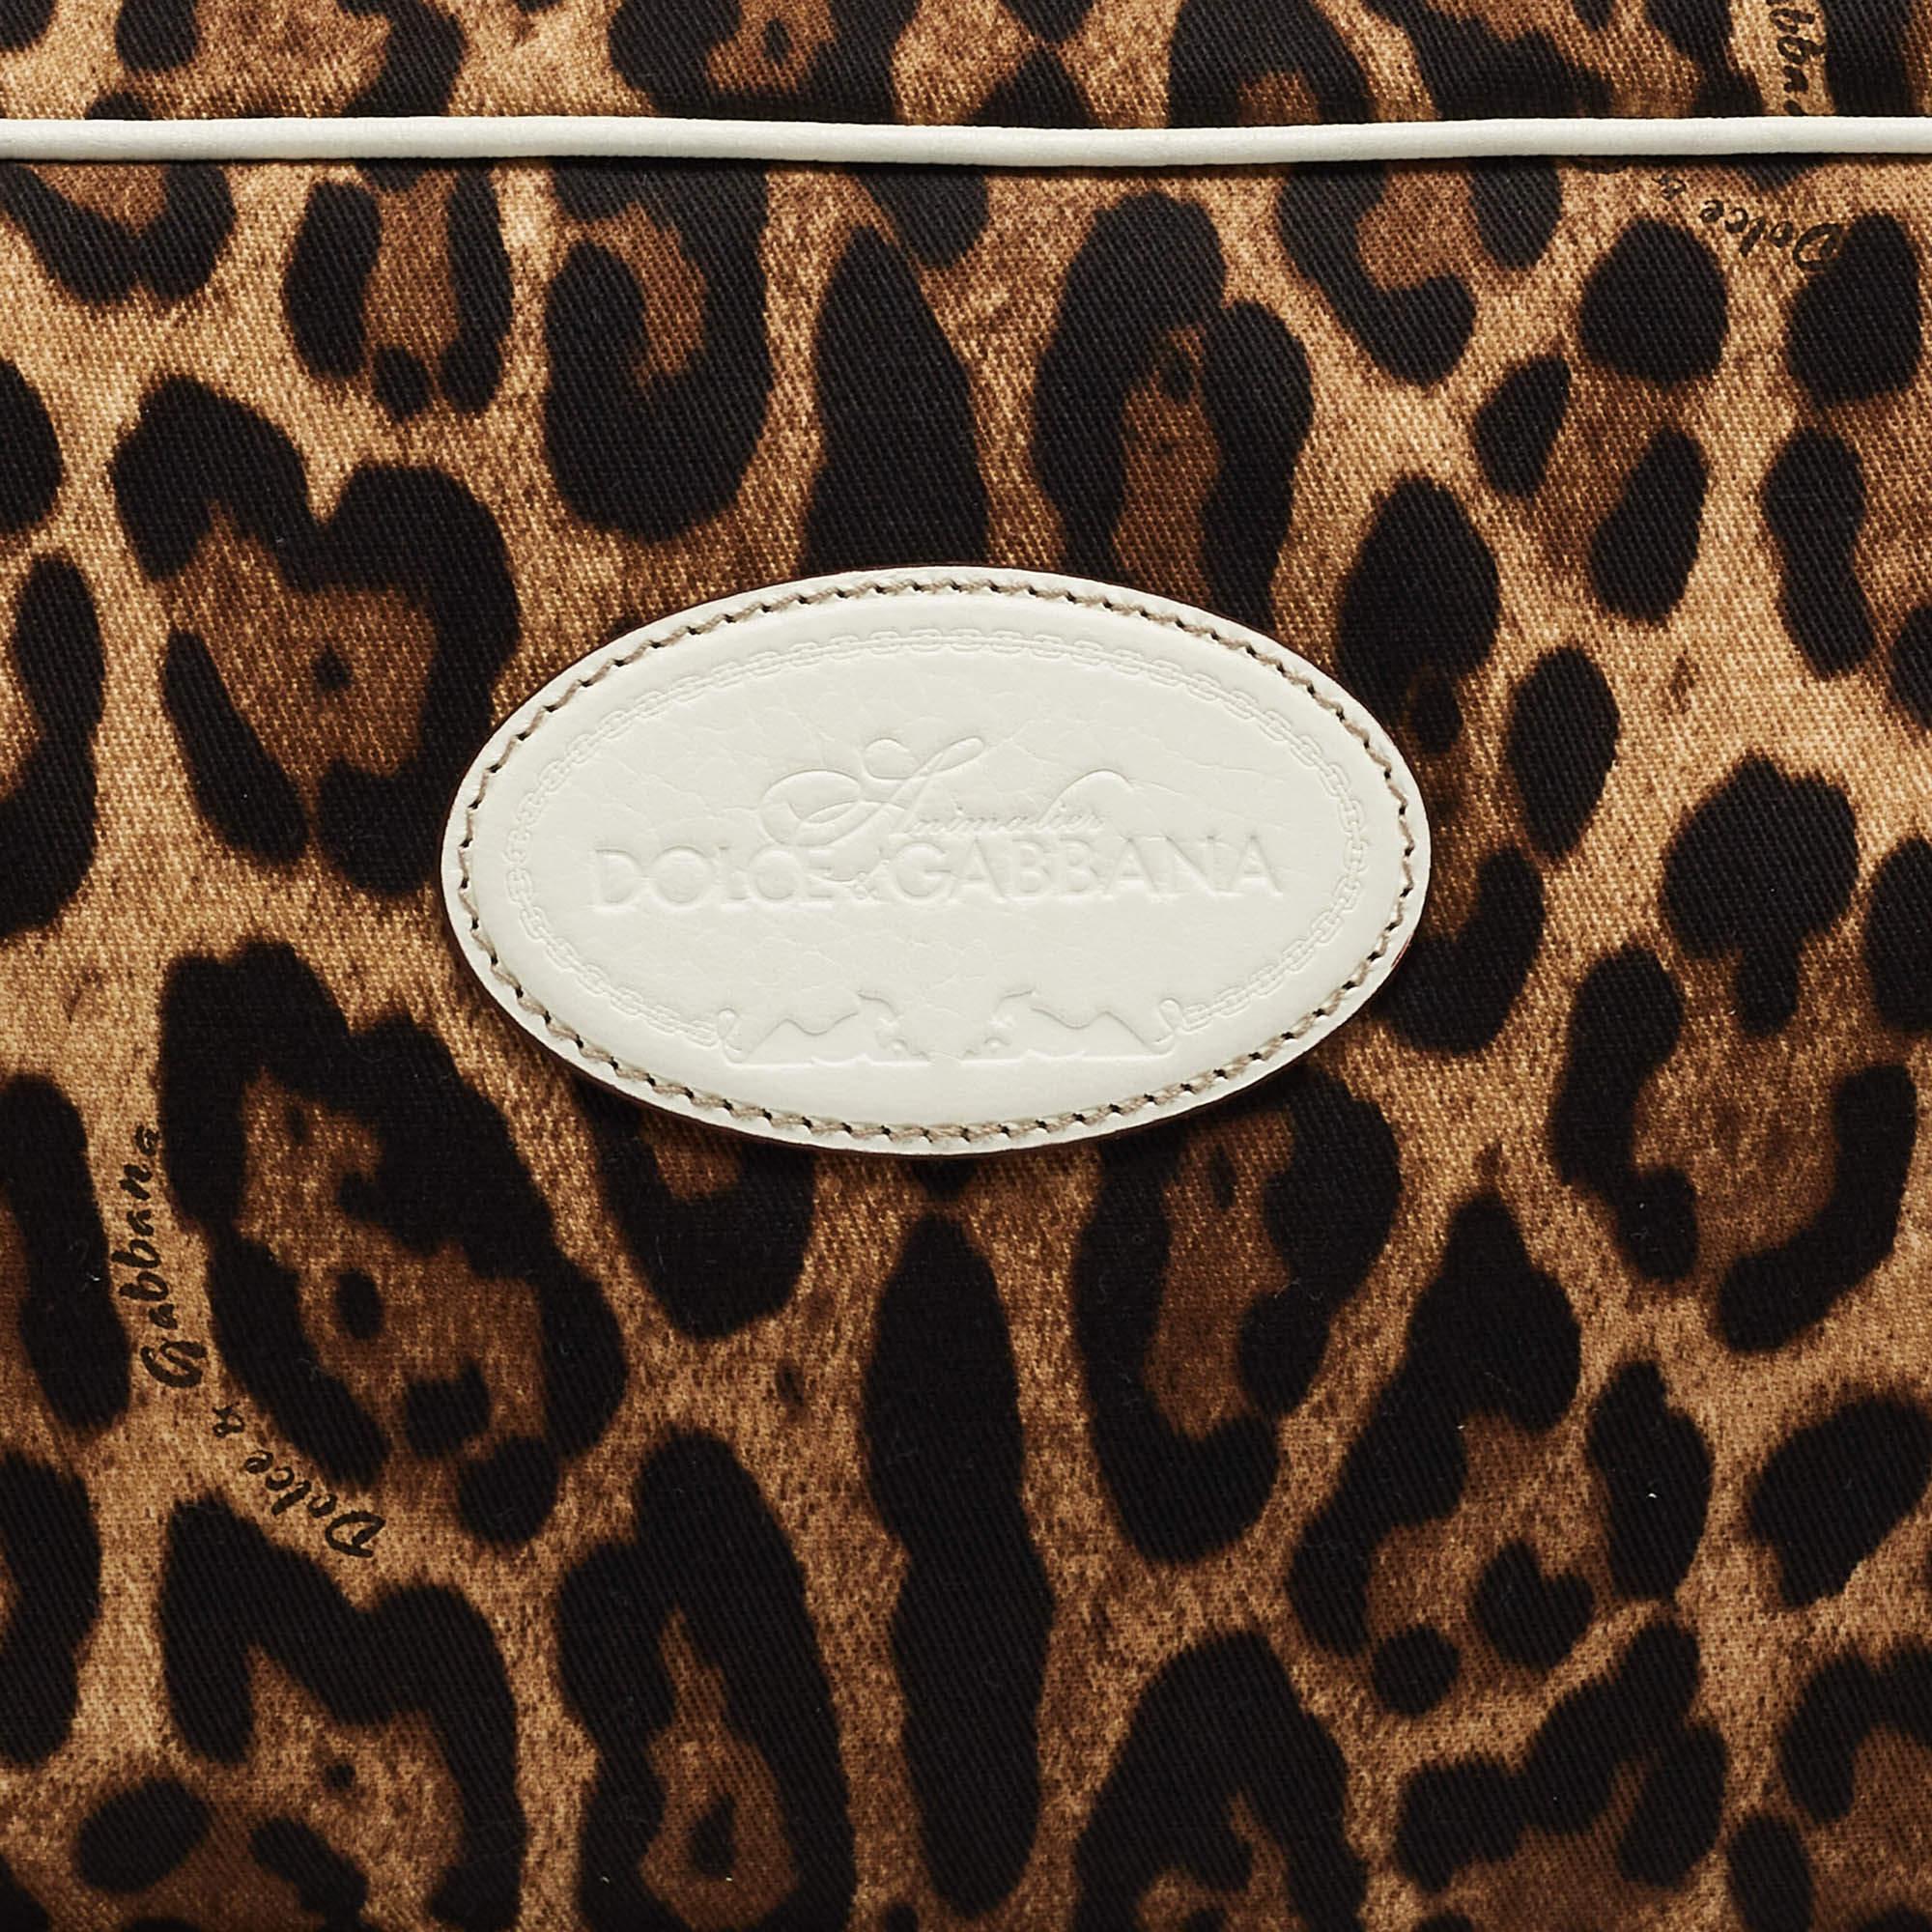 Women's Dolce & Gabbana White/Brown Leopard Print Fabric and Leather Cosmetic Pouch For Sale